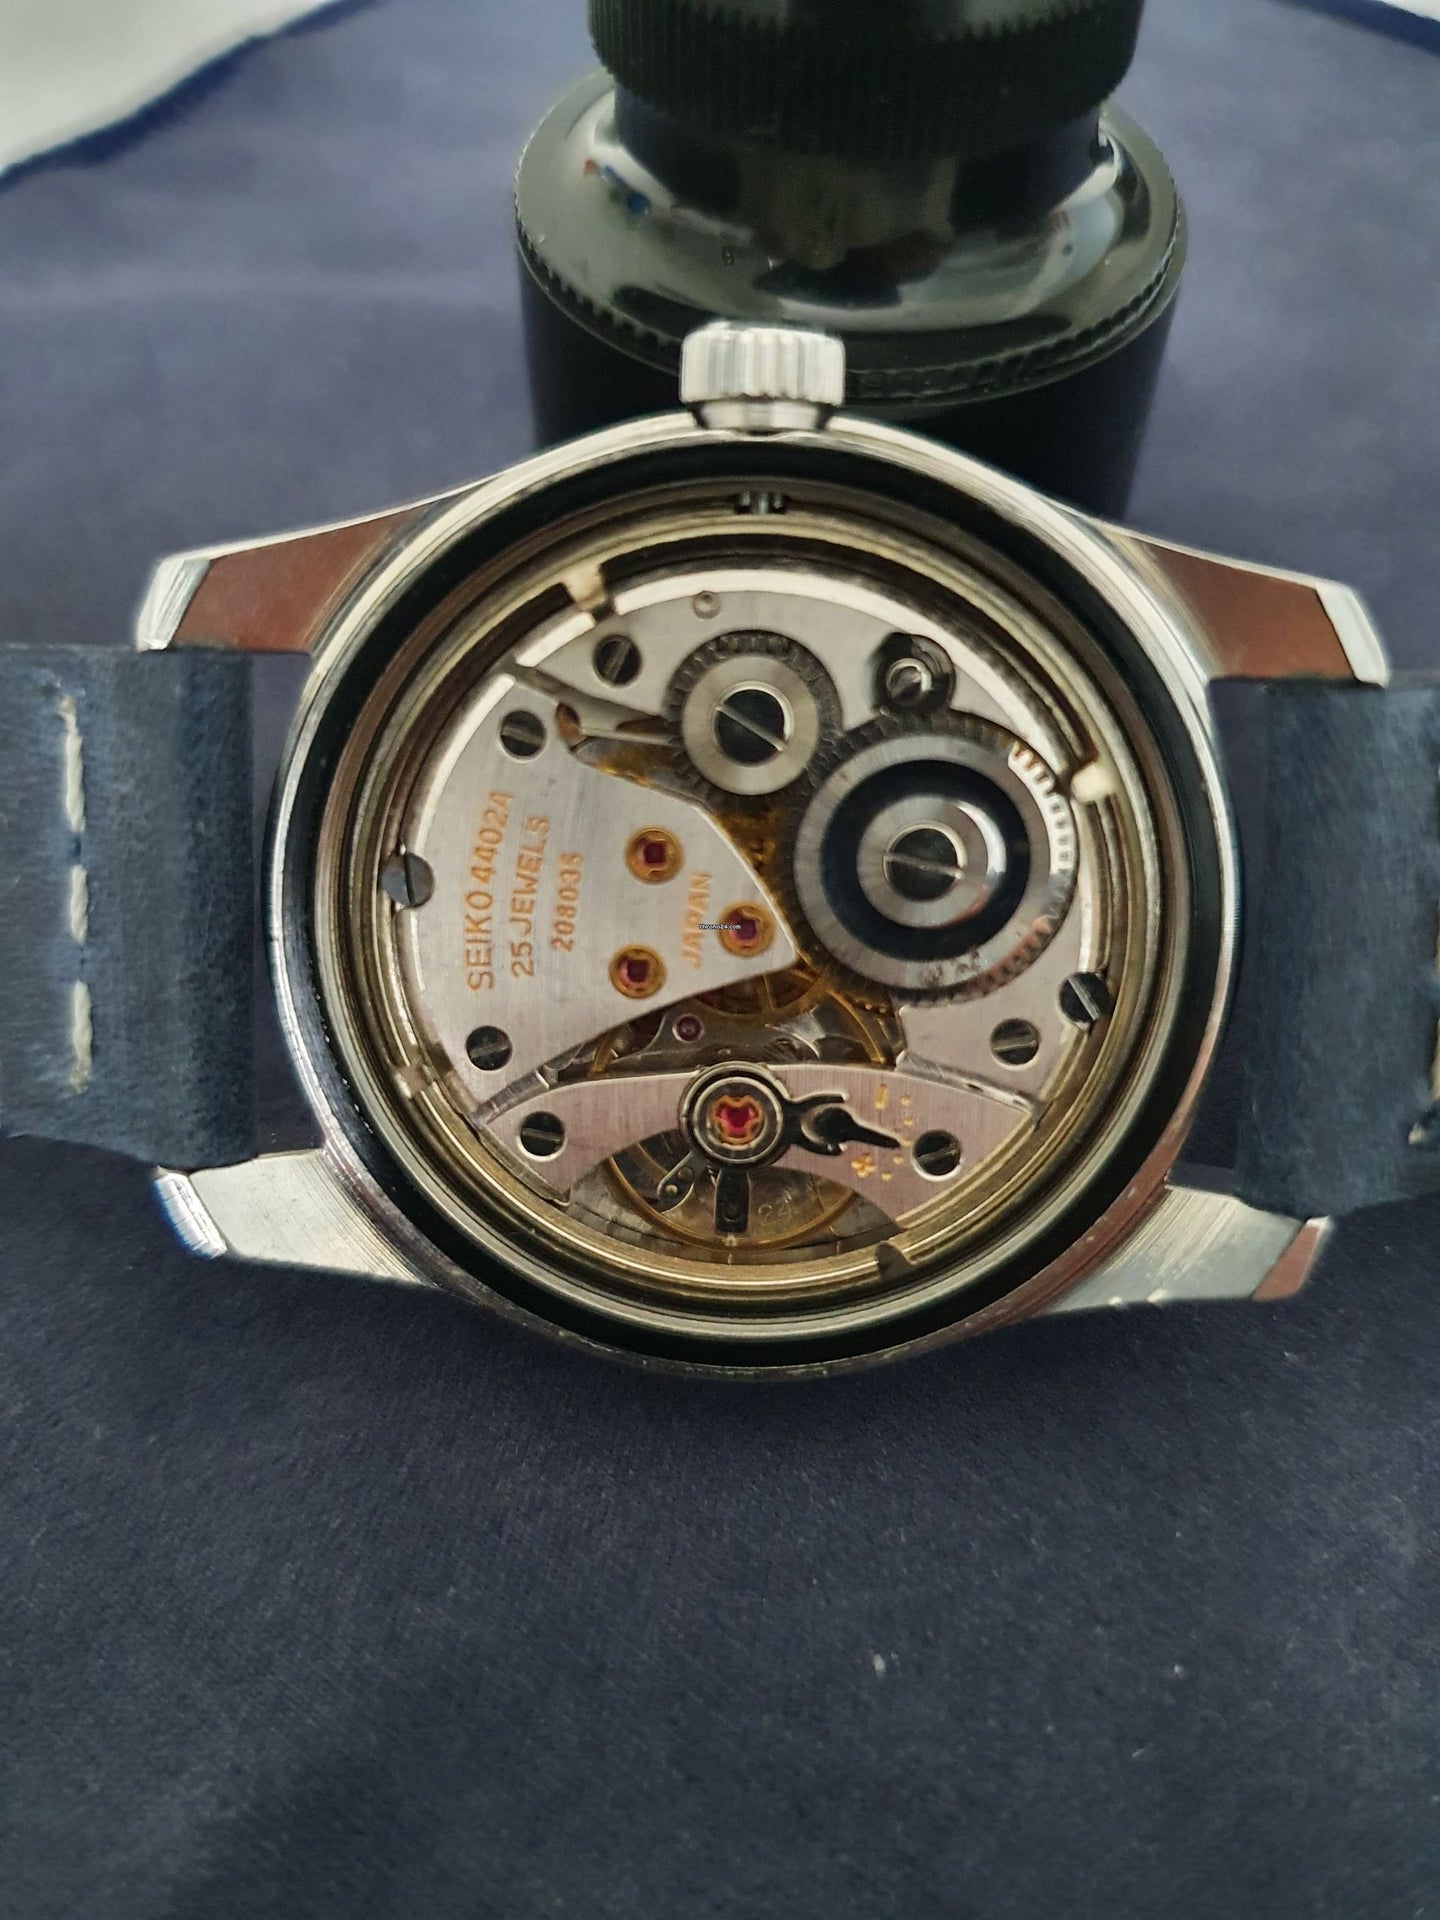 Seiko - Can you spot anything wrong with the movement or dial? | WatchUSeek  Watch Forums